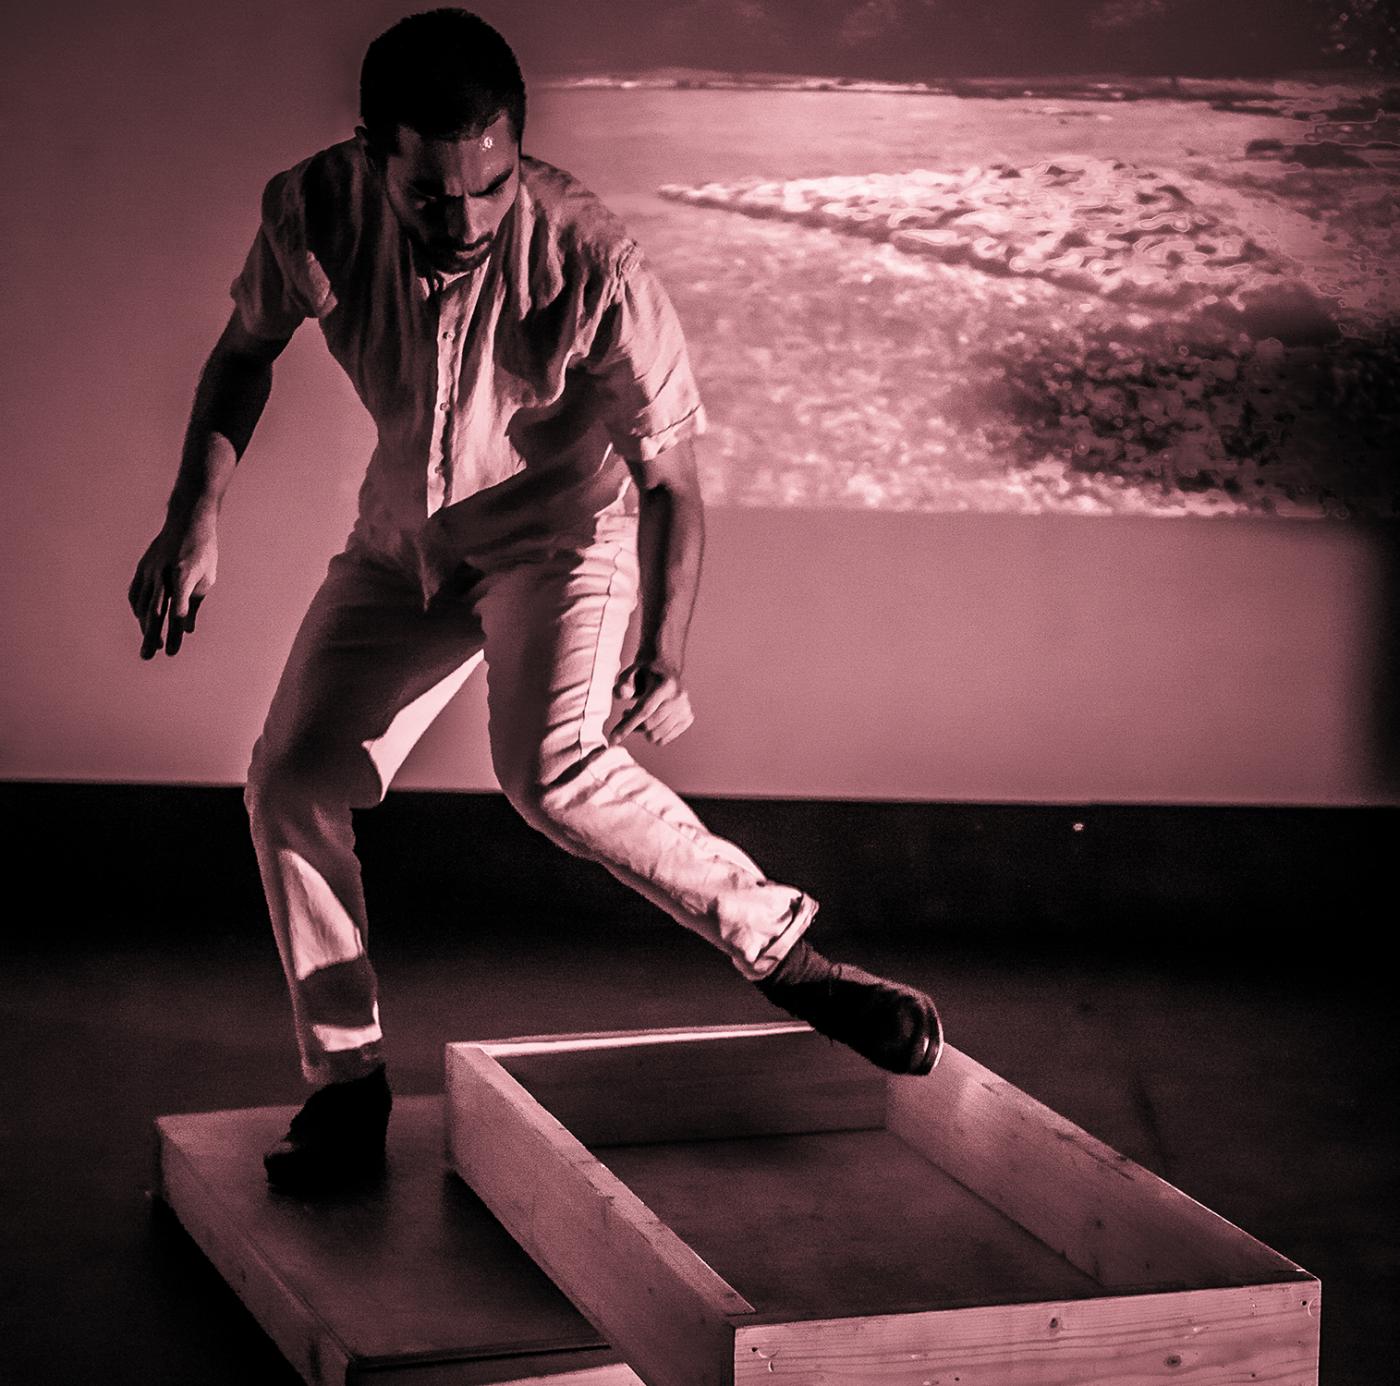 In front of a projection of the ocean, Orlando hops out of a small wooden frame on the floor.